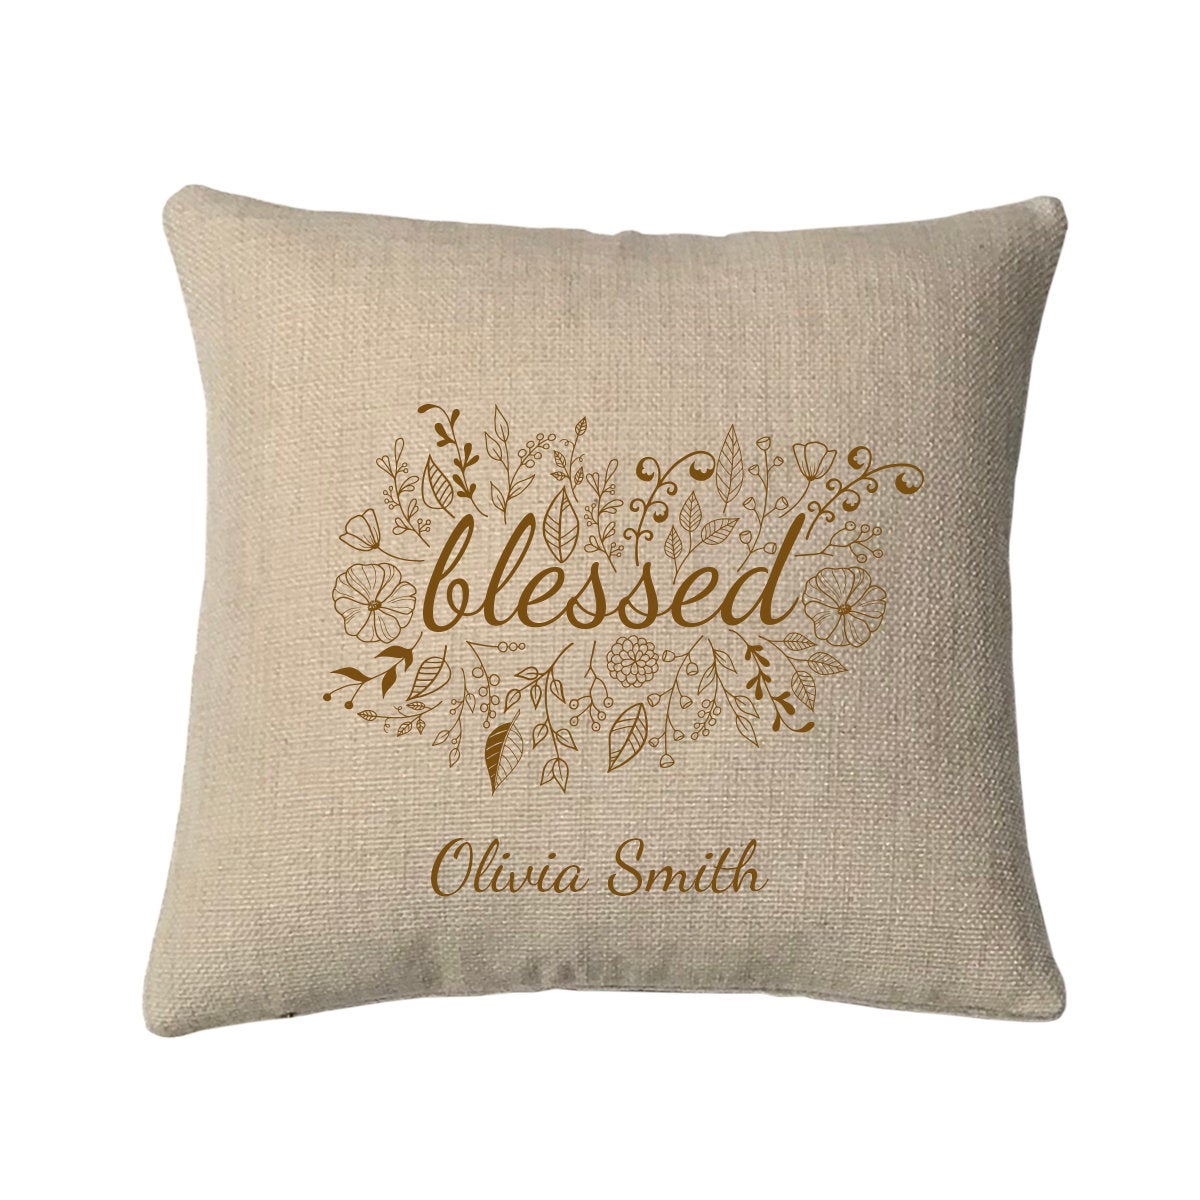 Personalized Blessed Mini Throw Pillow Measures 9.5 Inches X 9.5 Inches (Insert is included) Complete Very Small Throw Pillow